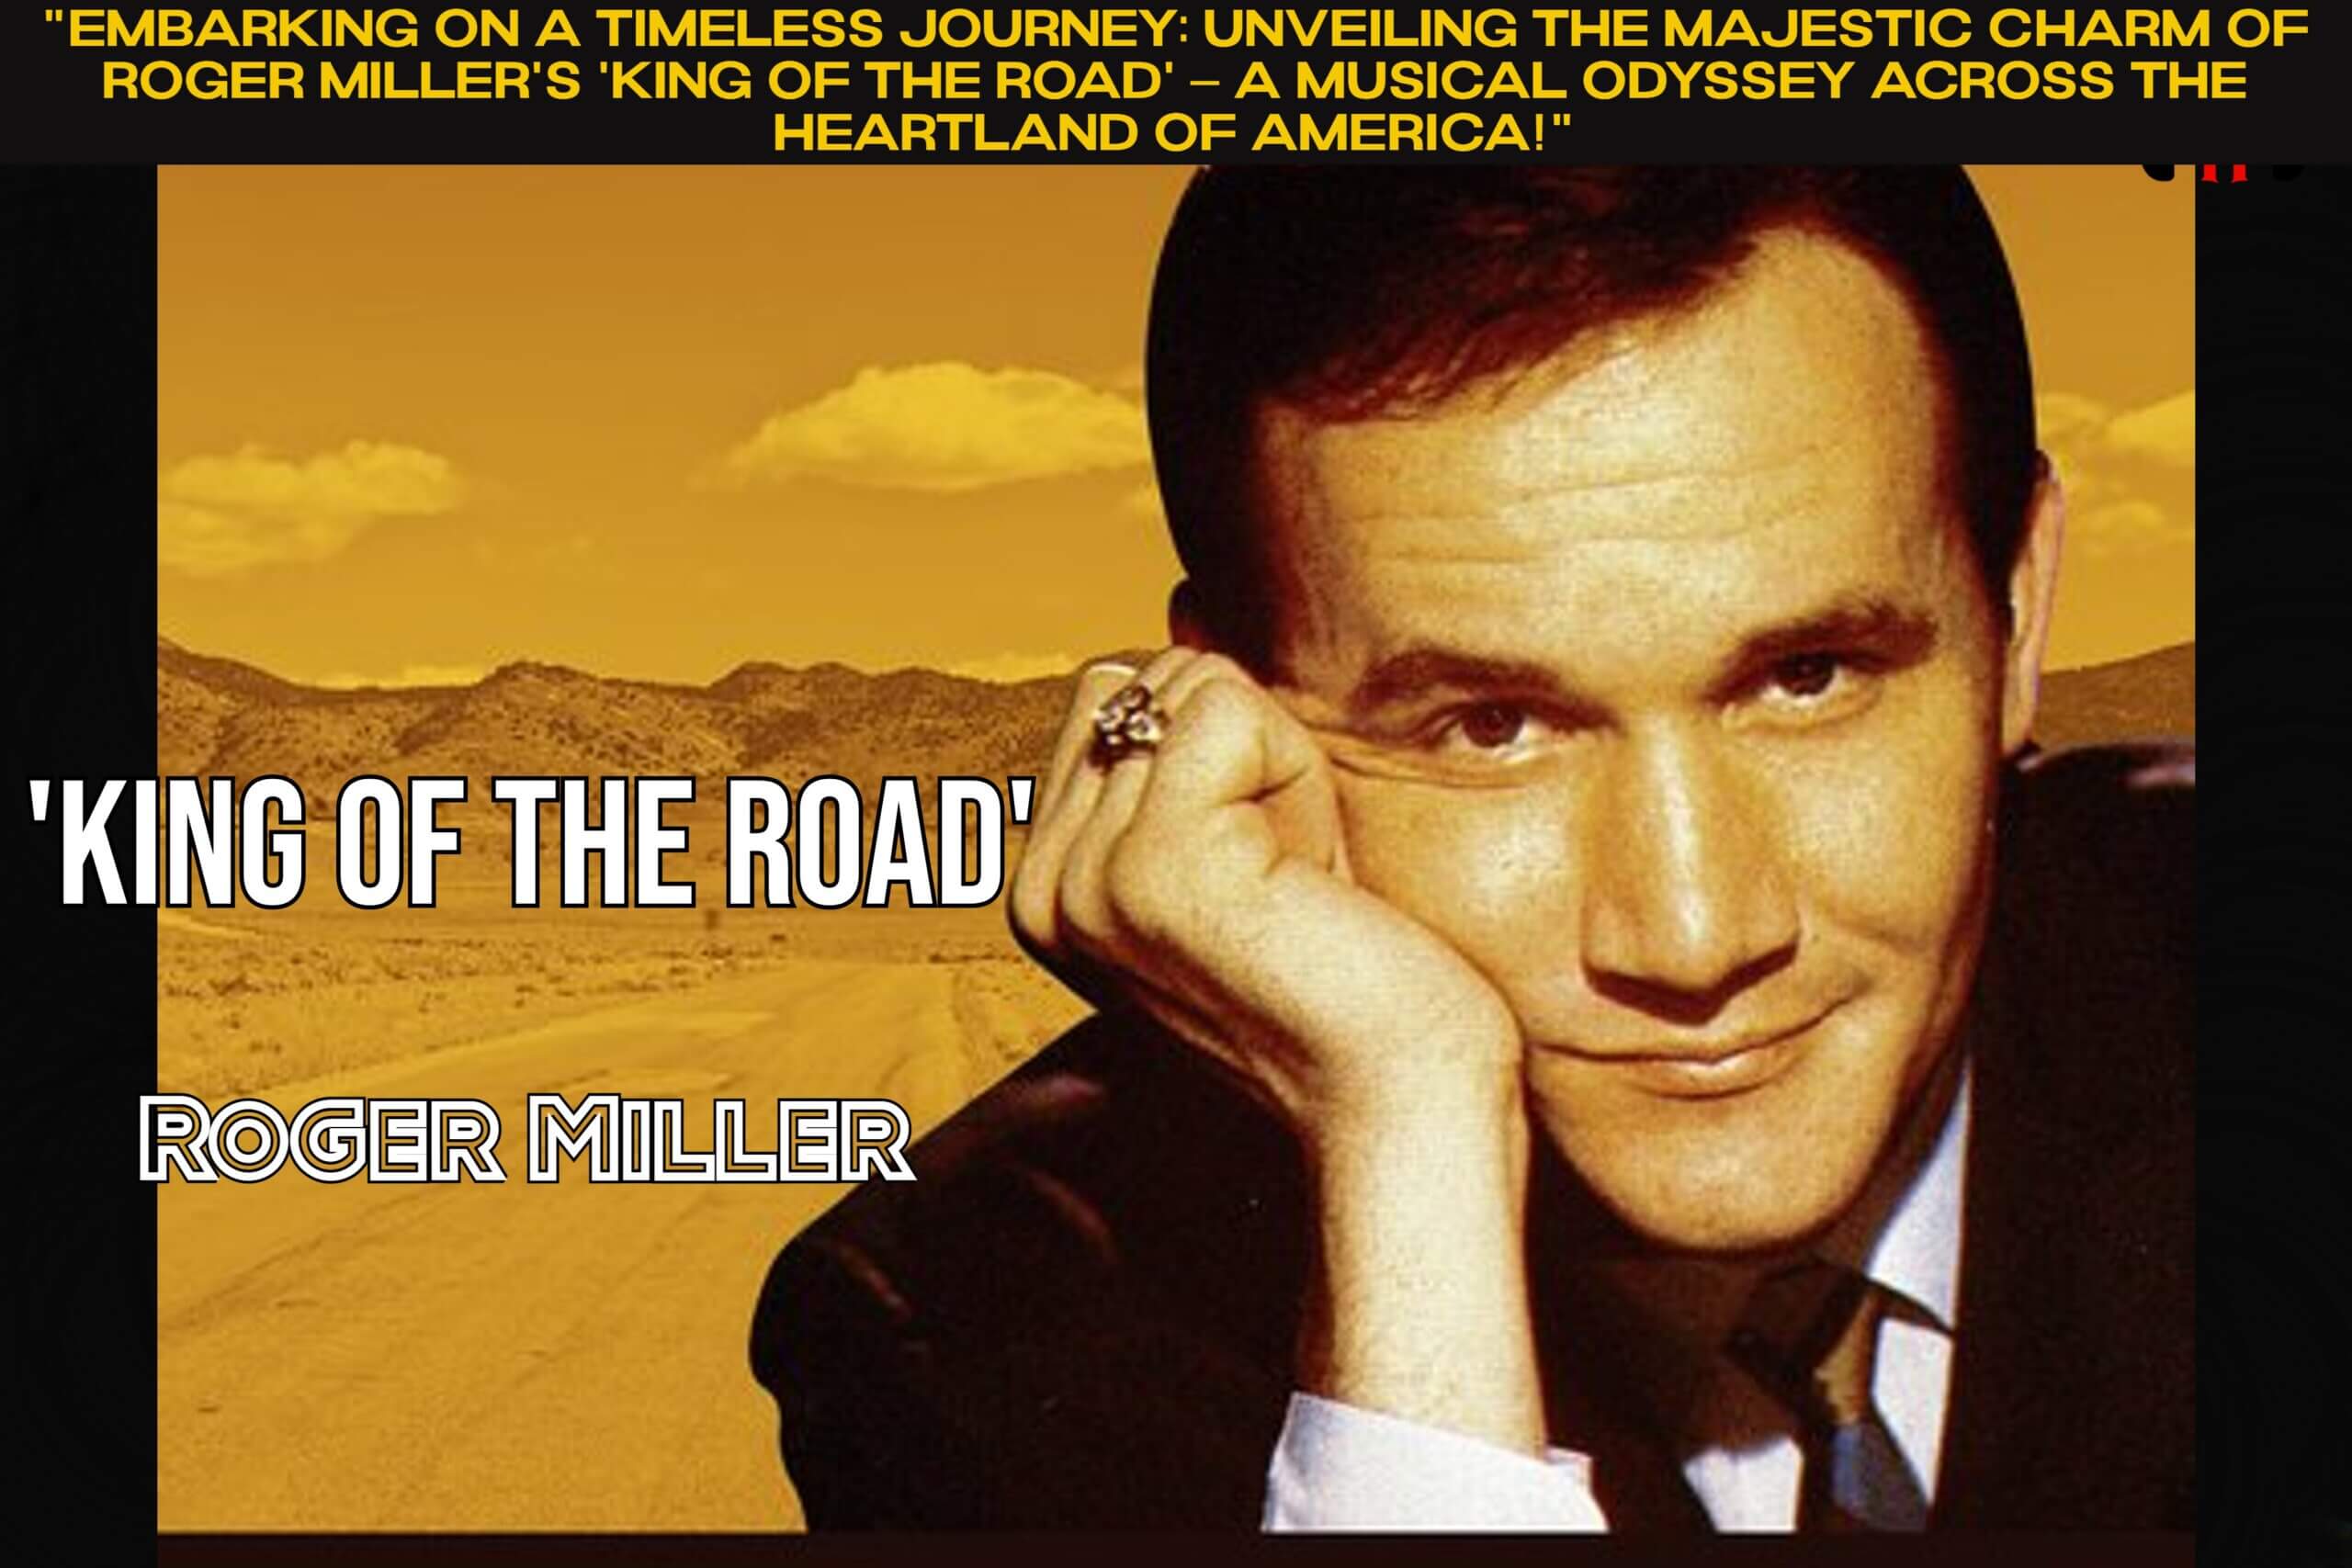 “Embarking on a Timeless Journey: Unveiling the Majestic Charm of Roger Miller’s ‘King of the Road’ – A Musical Odyssey Across the Heartland of America!”